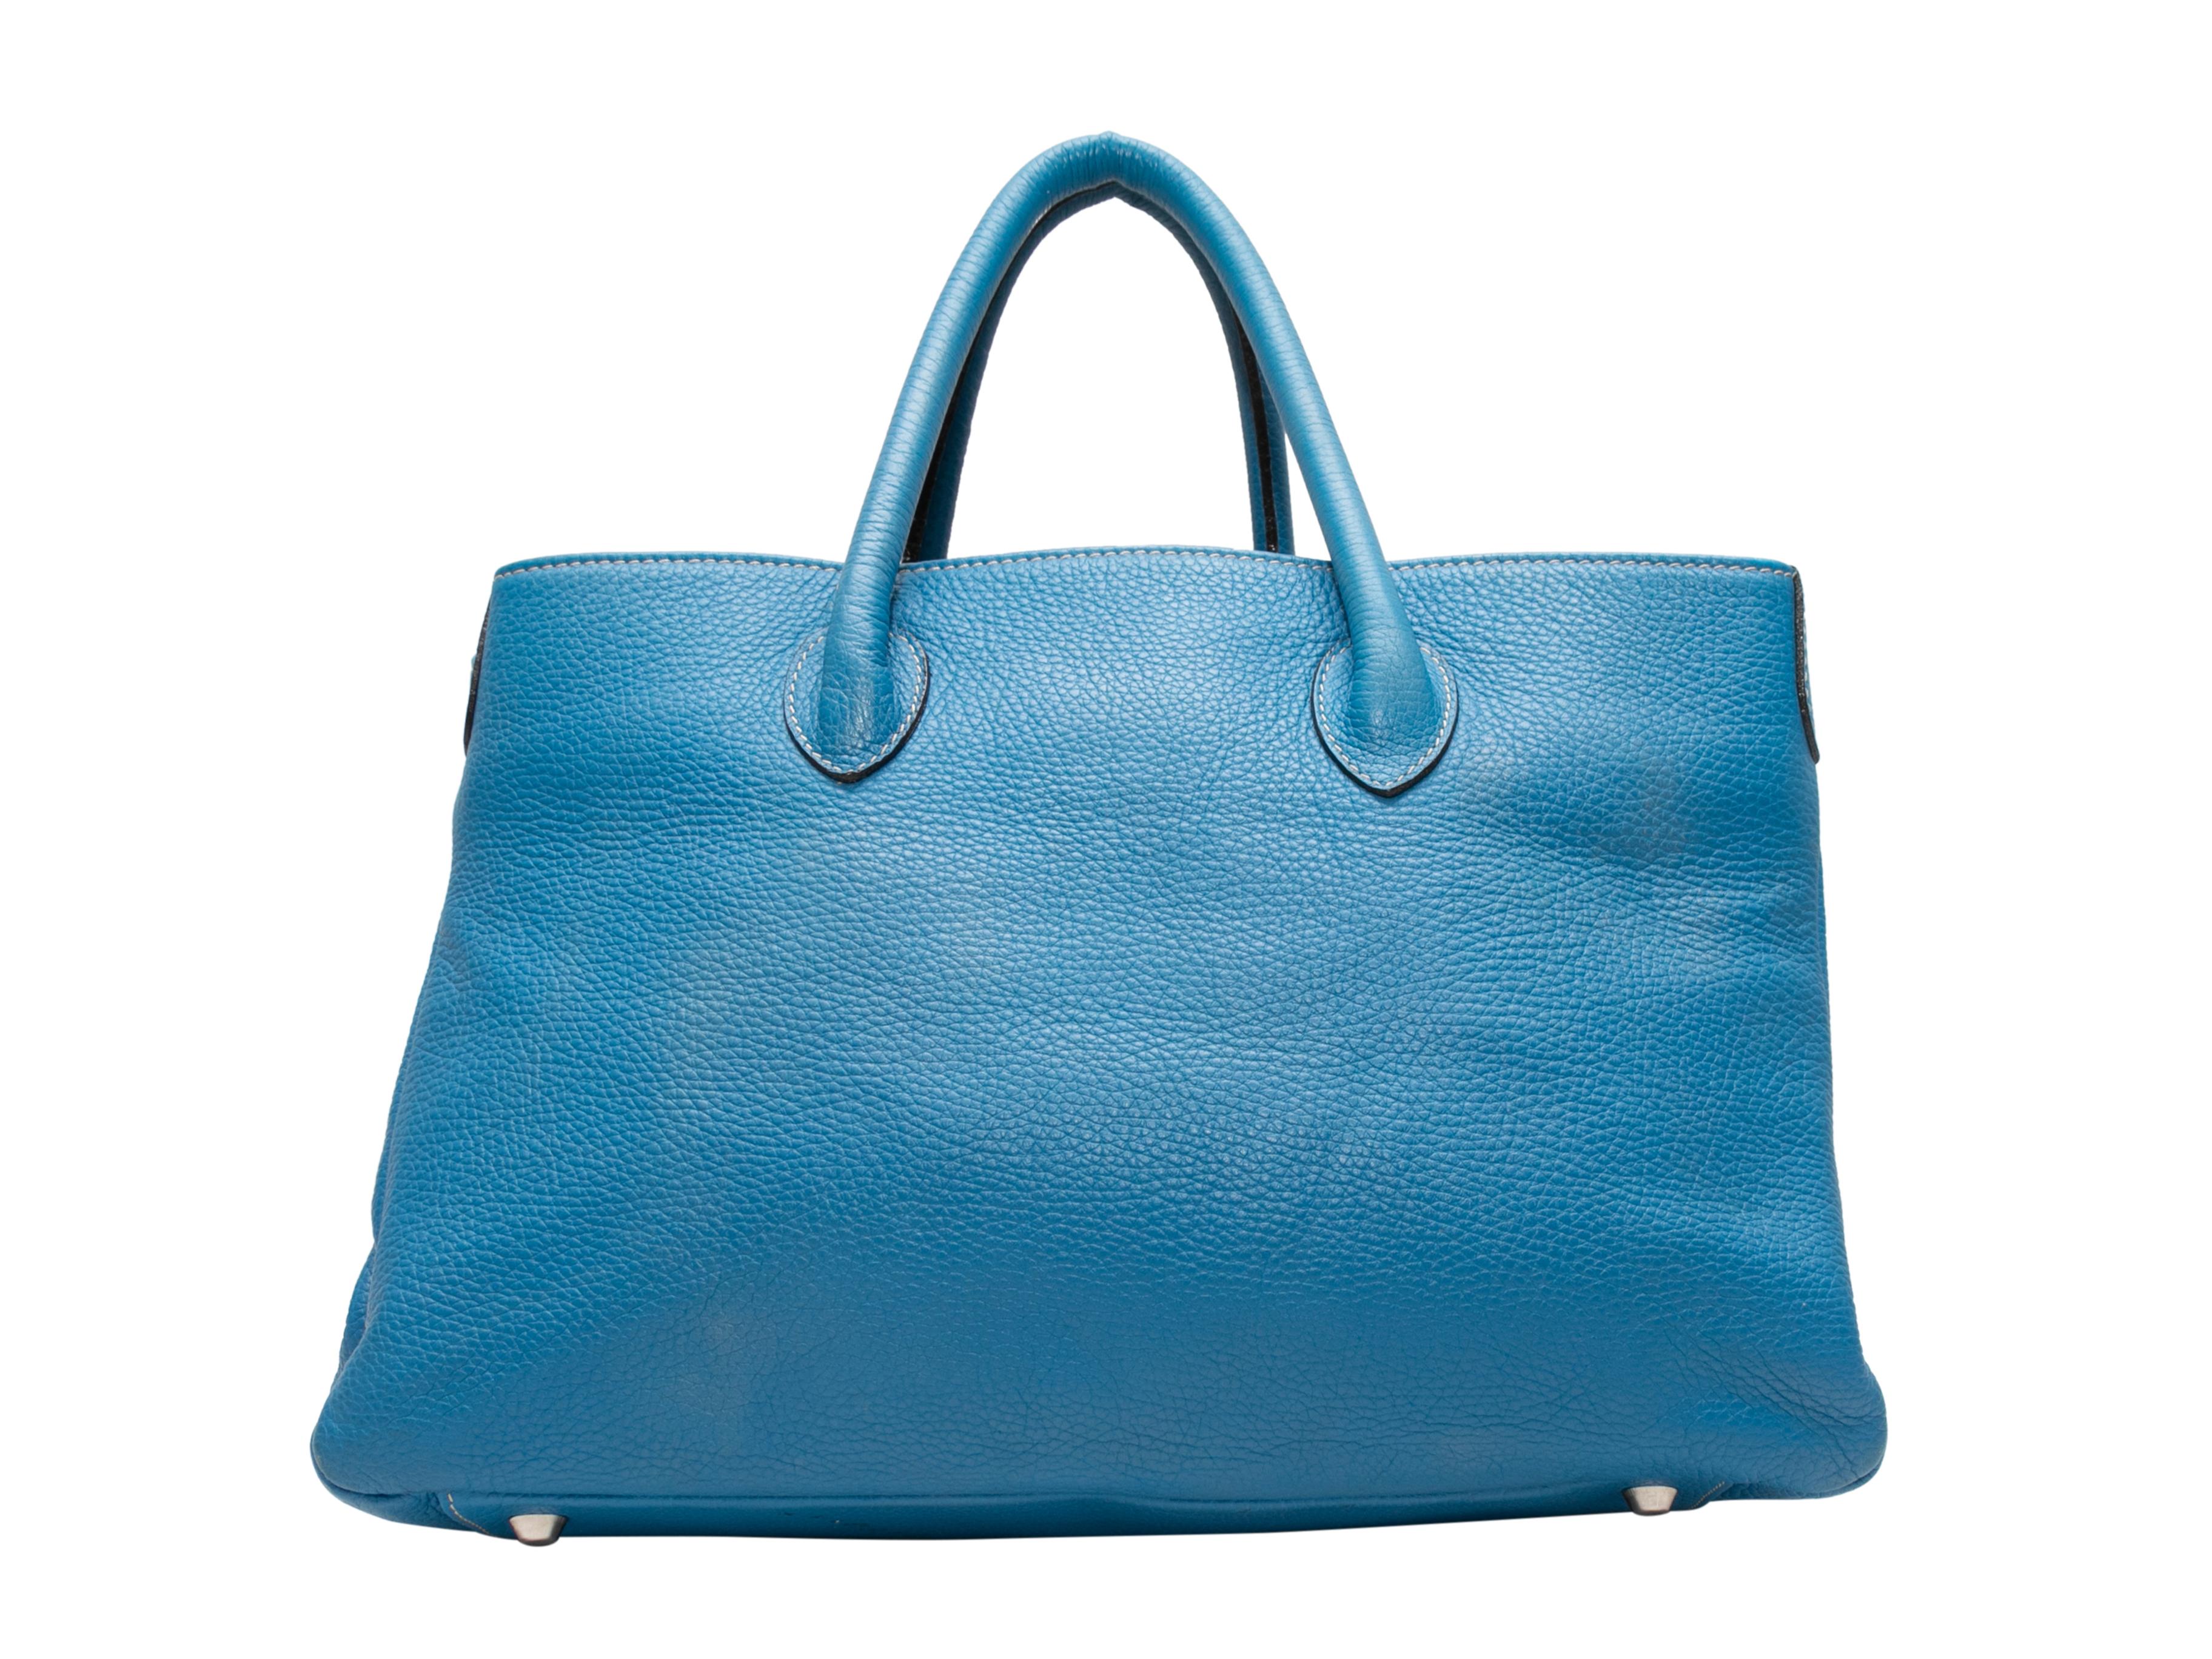 Blue Suarez Leather Crossbody Tote Bag In Good Condition For Sale In New York, NY